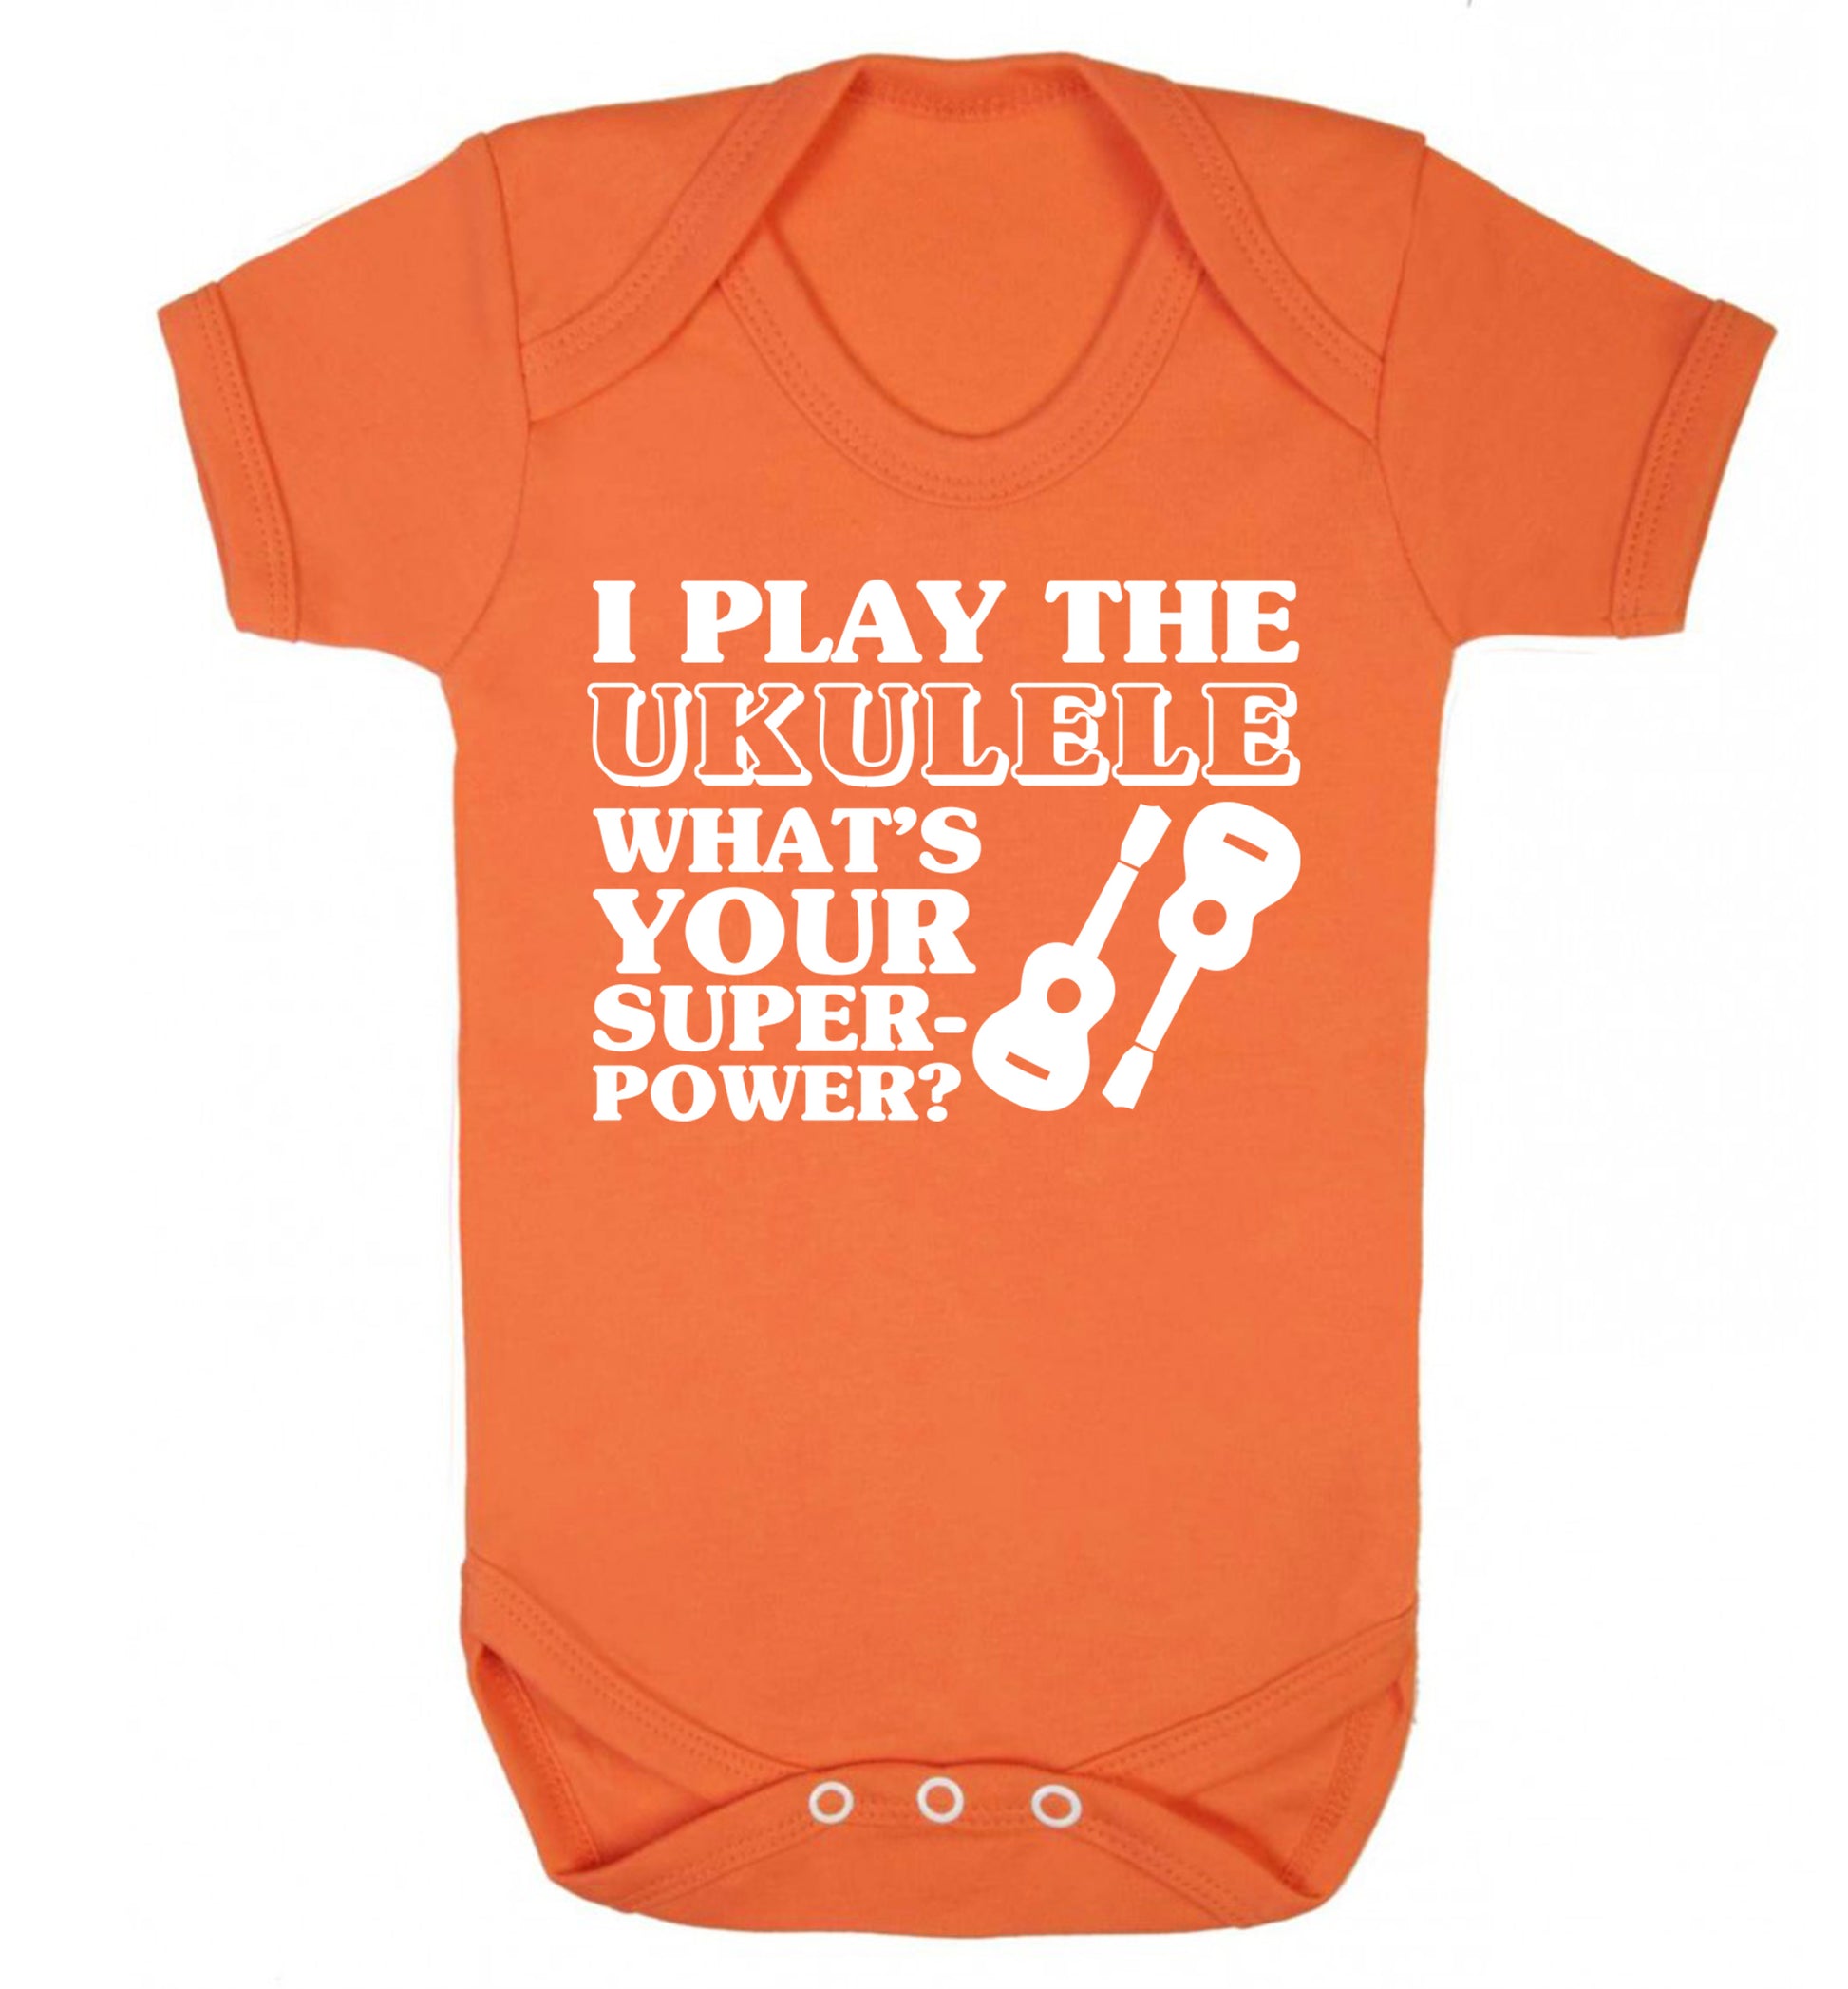 I play the ukulele what's your superpower? Baby Vest orange 18-24 months